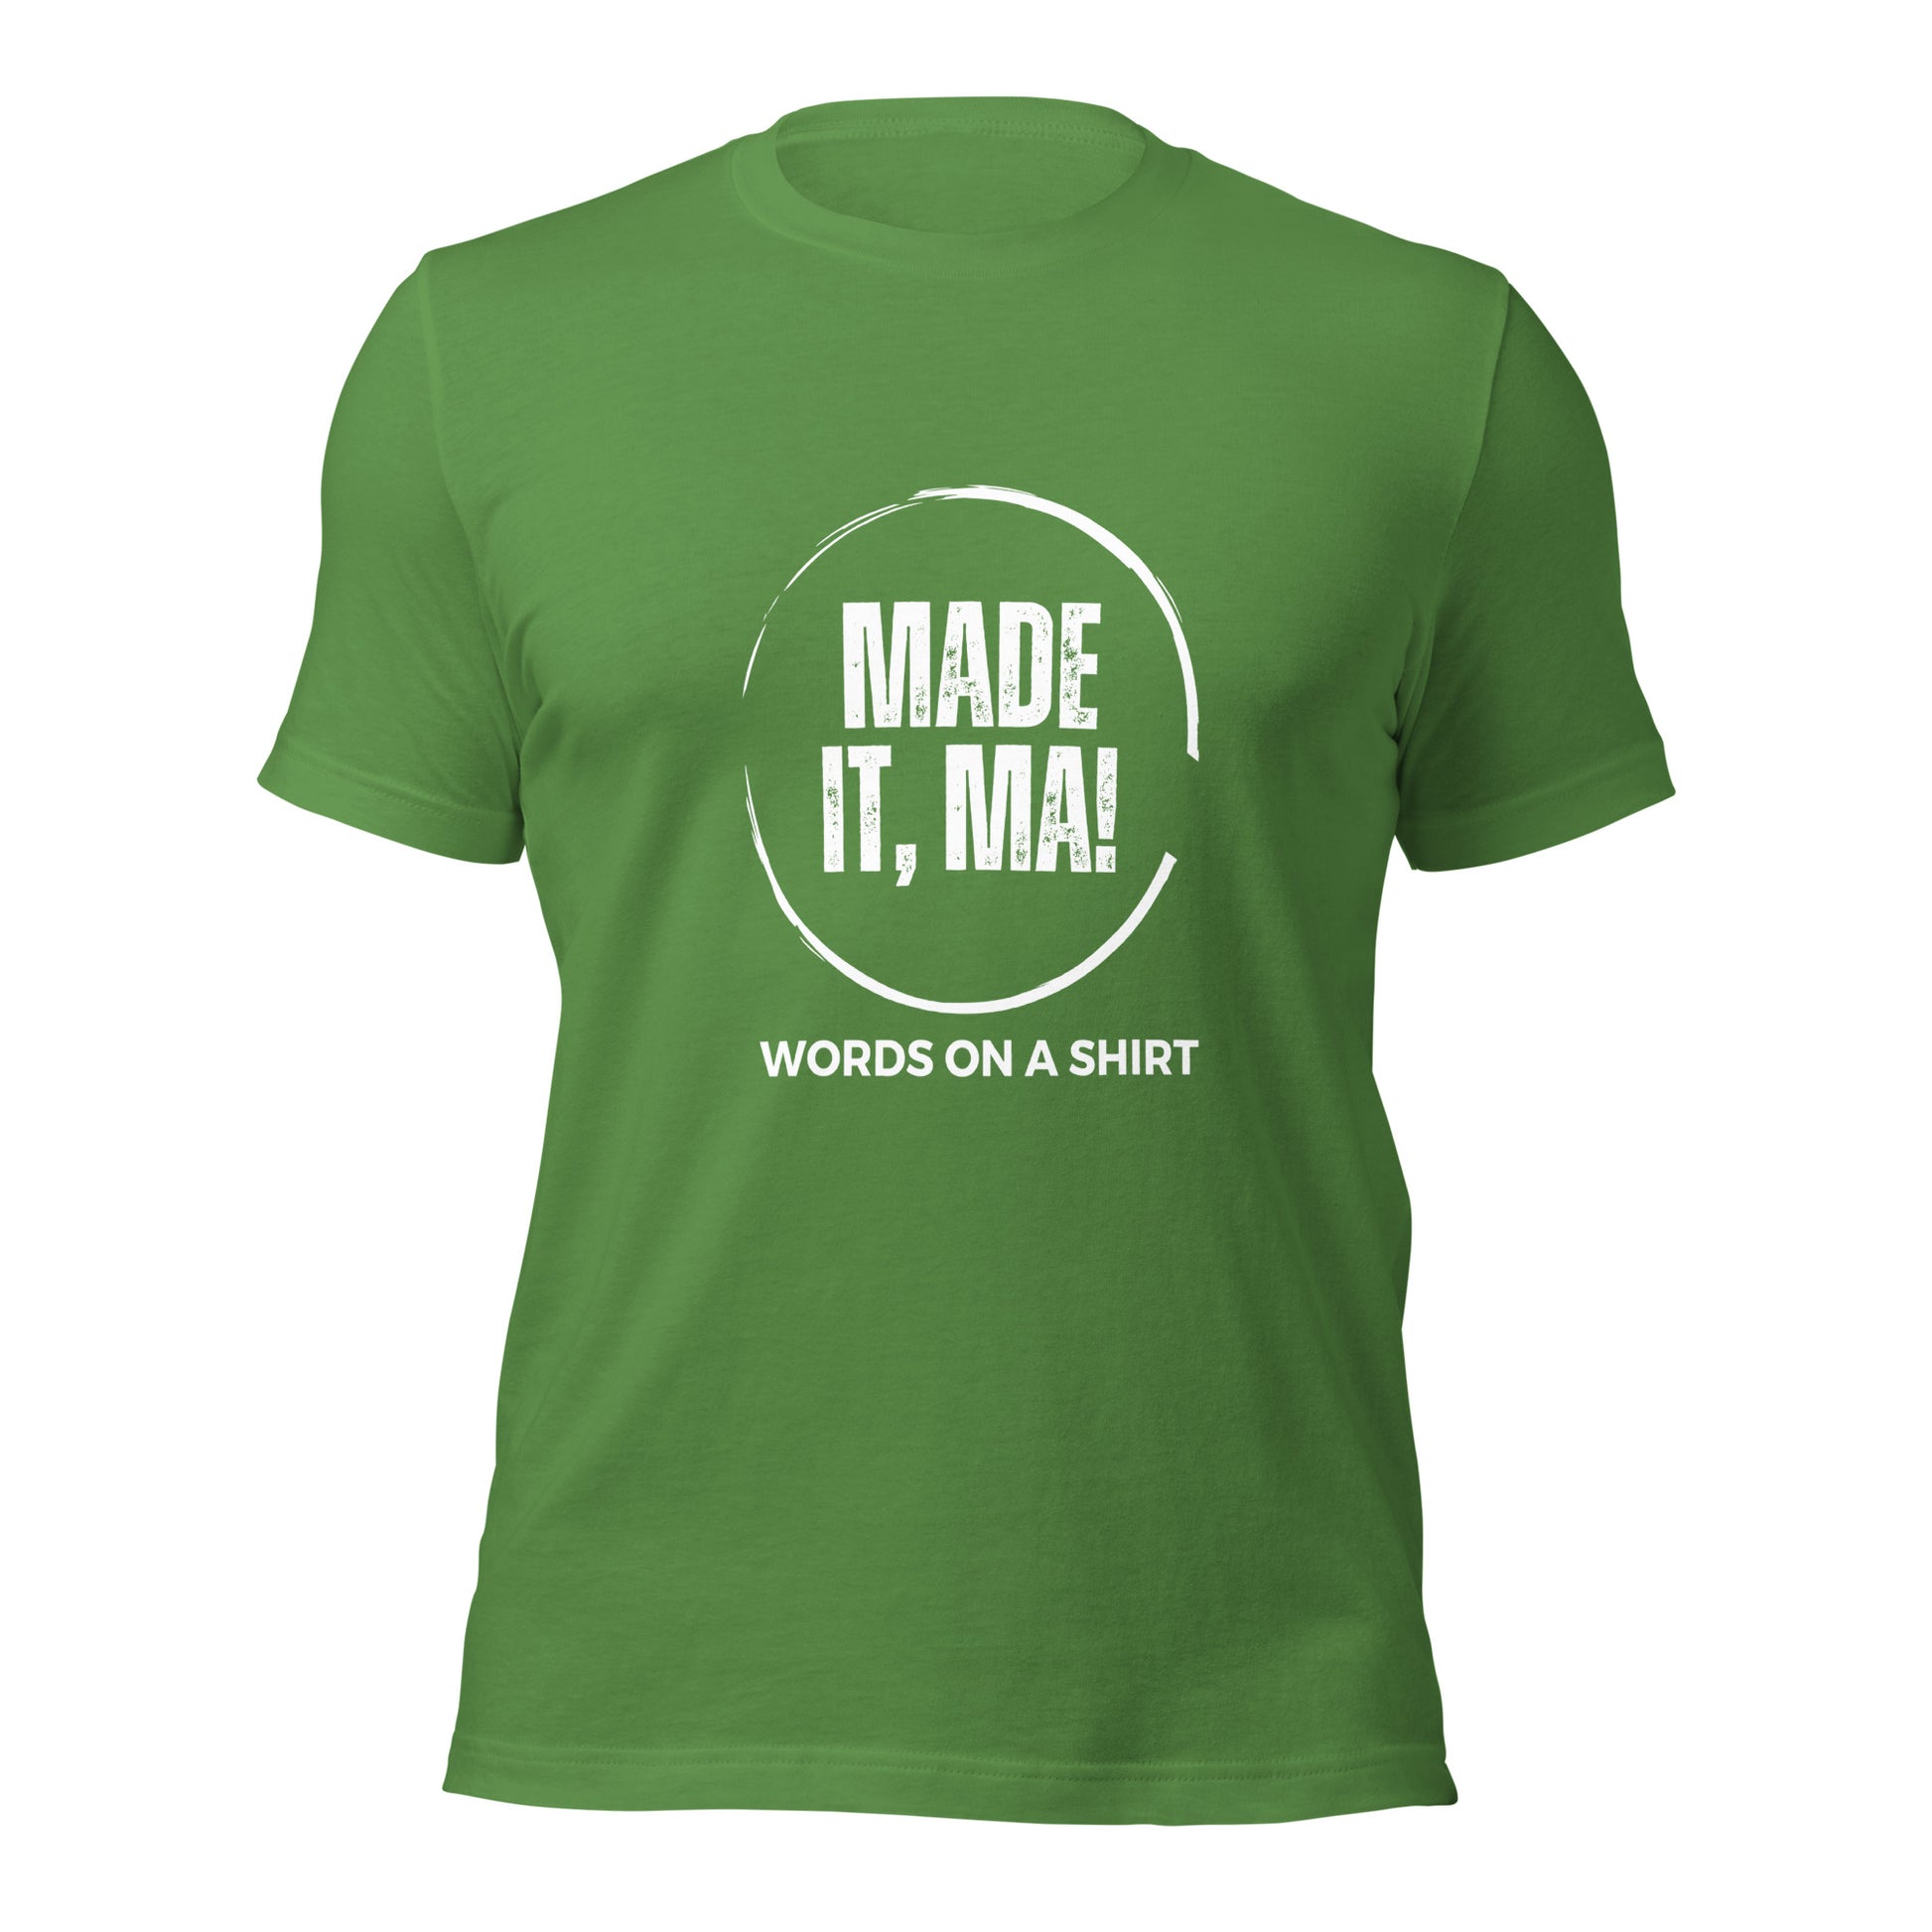 Let mom know your success with our Unisex T-Shirt-Made It Ma. Experience the best 100% cotton fabric that's pre-shrunk and has side-seamed construction. And the fit? Simply unbeatable.